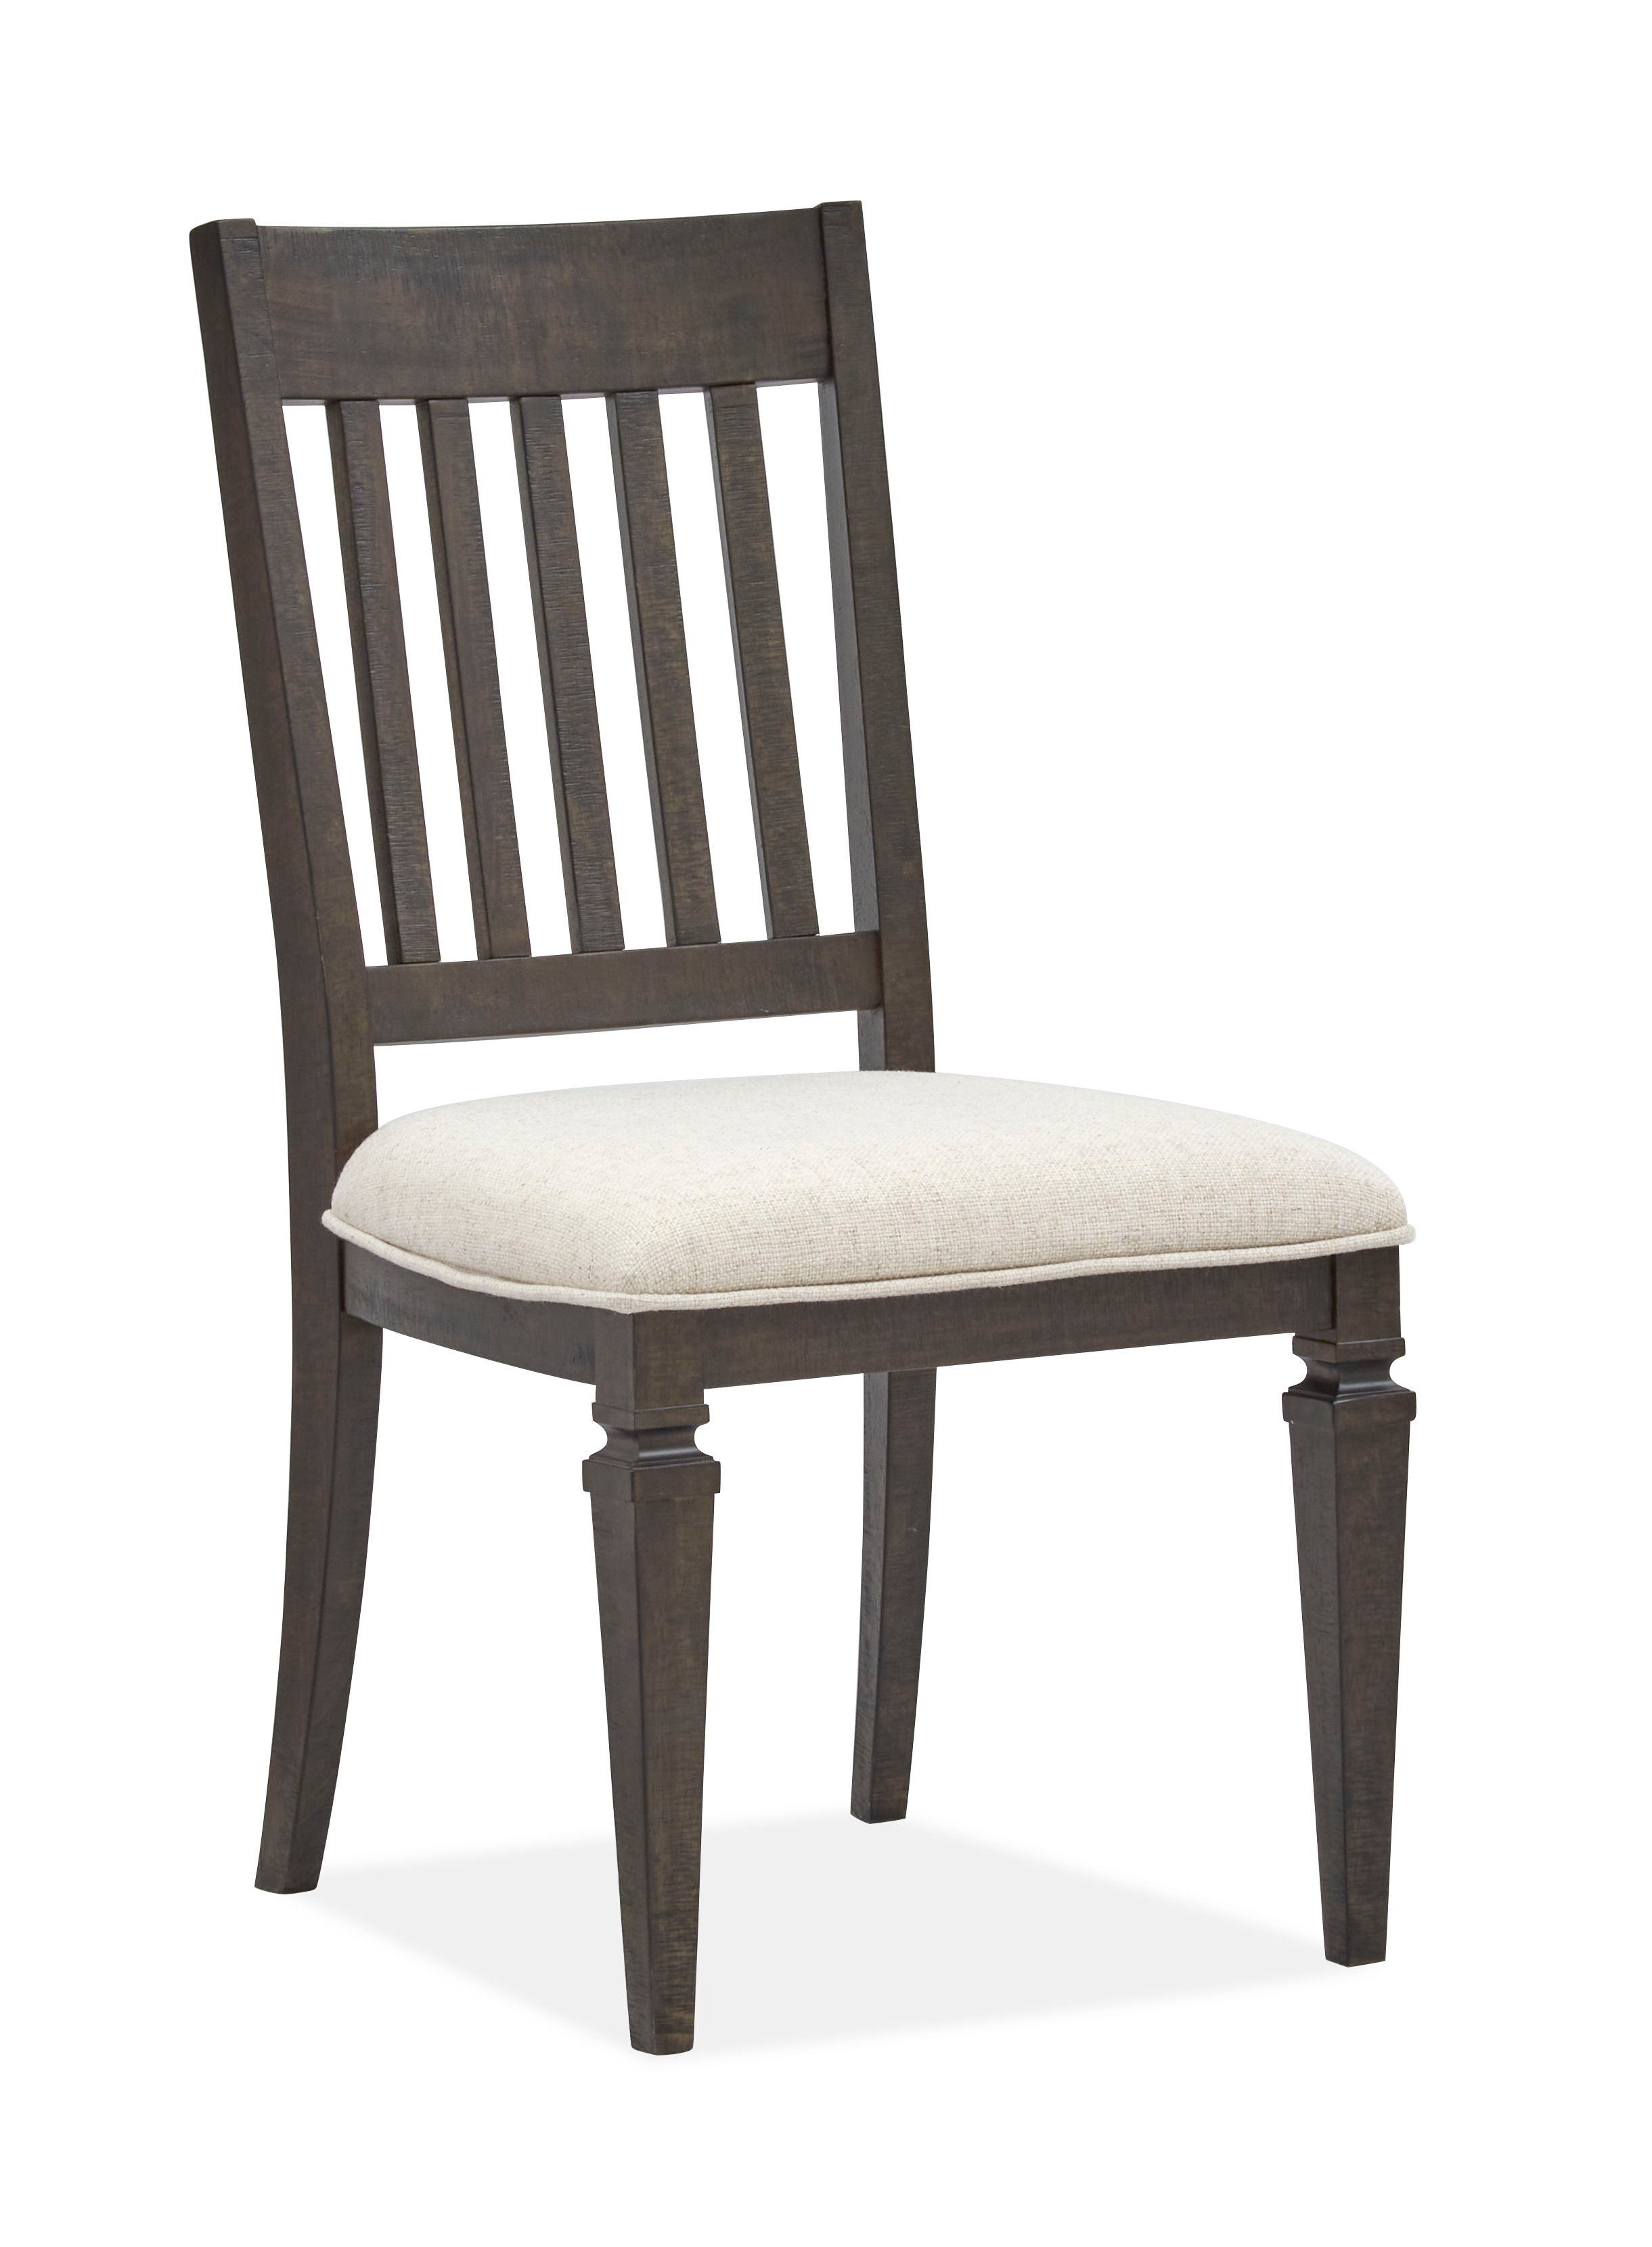 Calistoga - Dining Side Chair With Upholstered Seat (Set of 2) - Weathered Charcoal